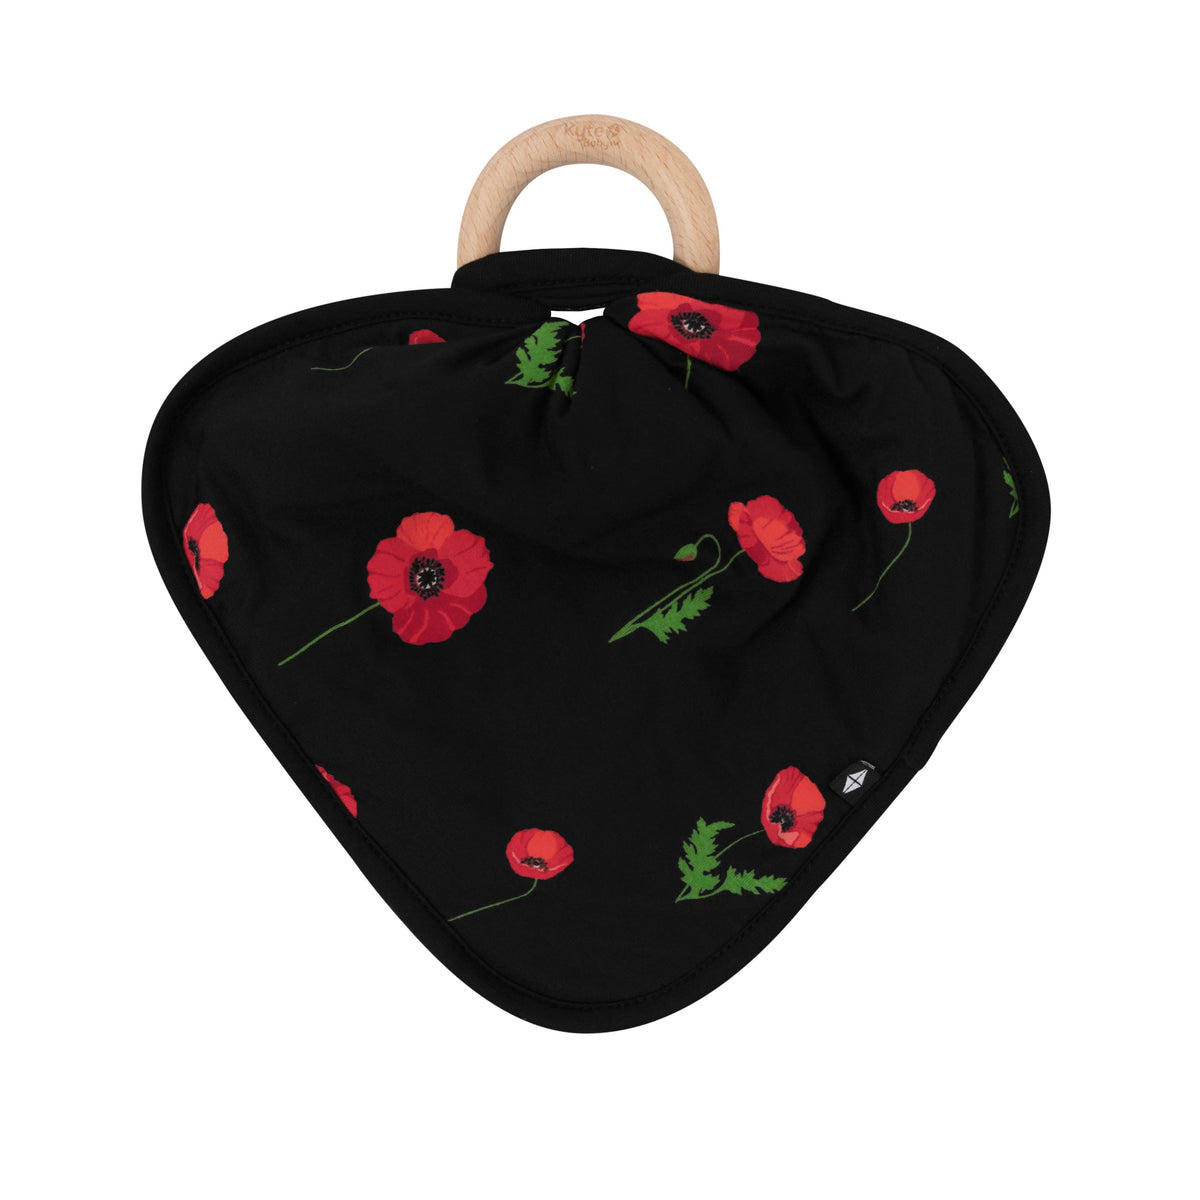 Kyte Baby Lovey Midnight Poppies / Infant Lovey in Midnight Poppies with Removable Teething Ring